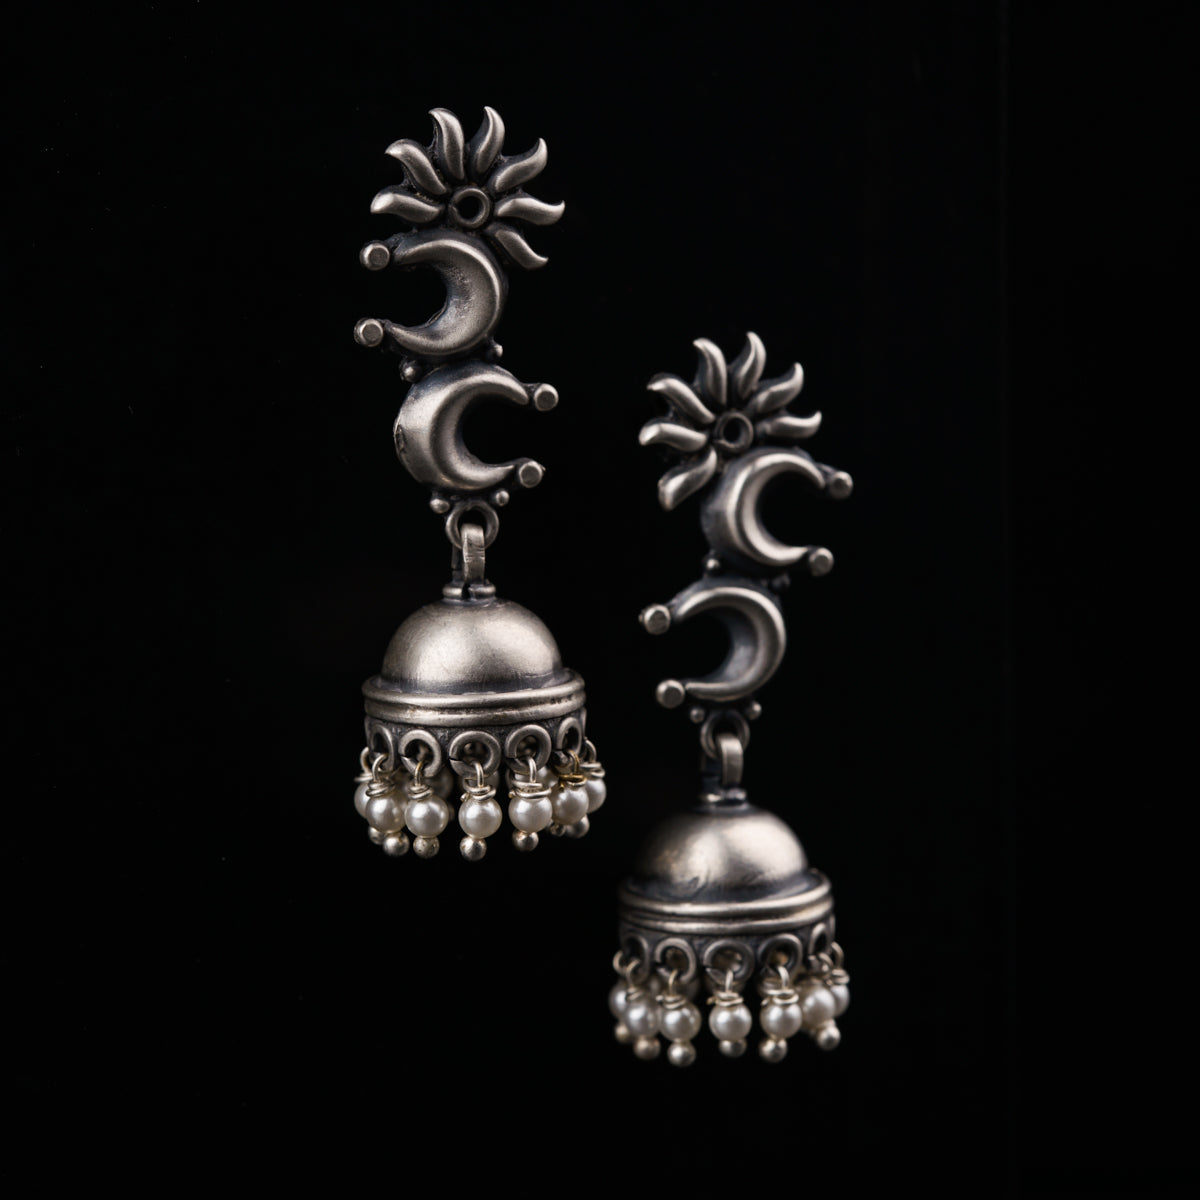 a pair of silver bells on a black background